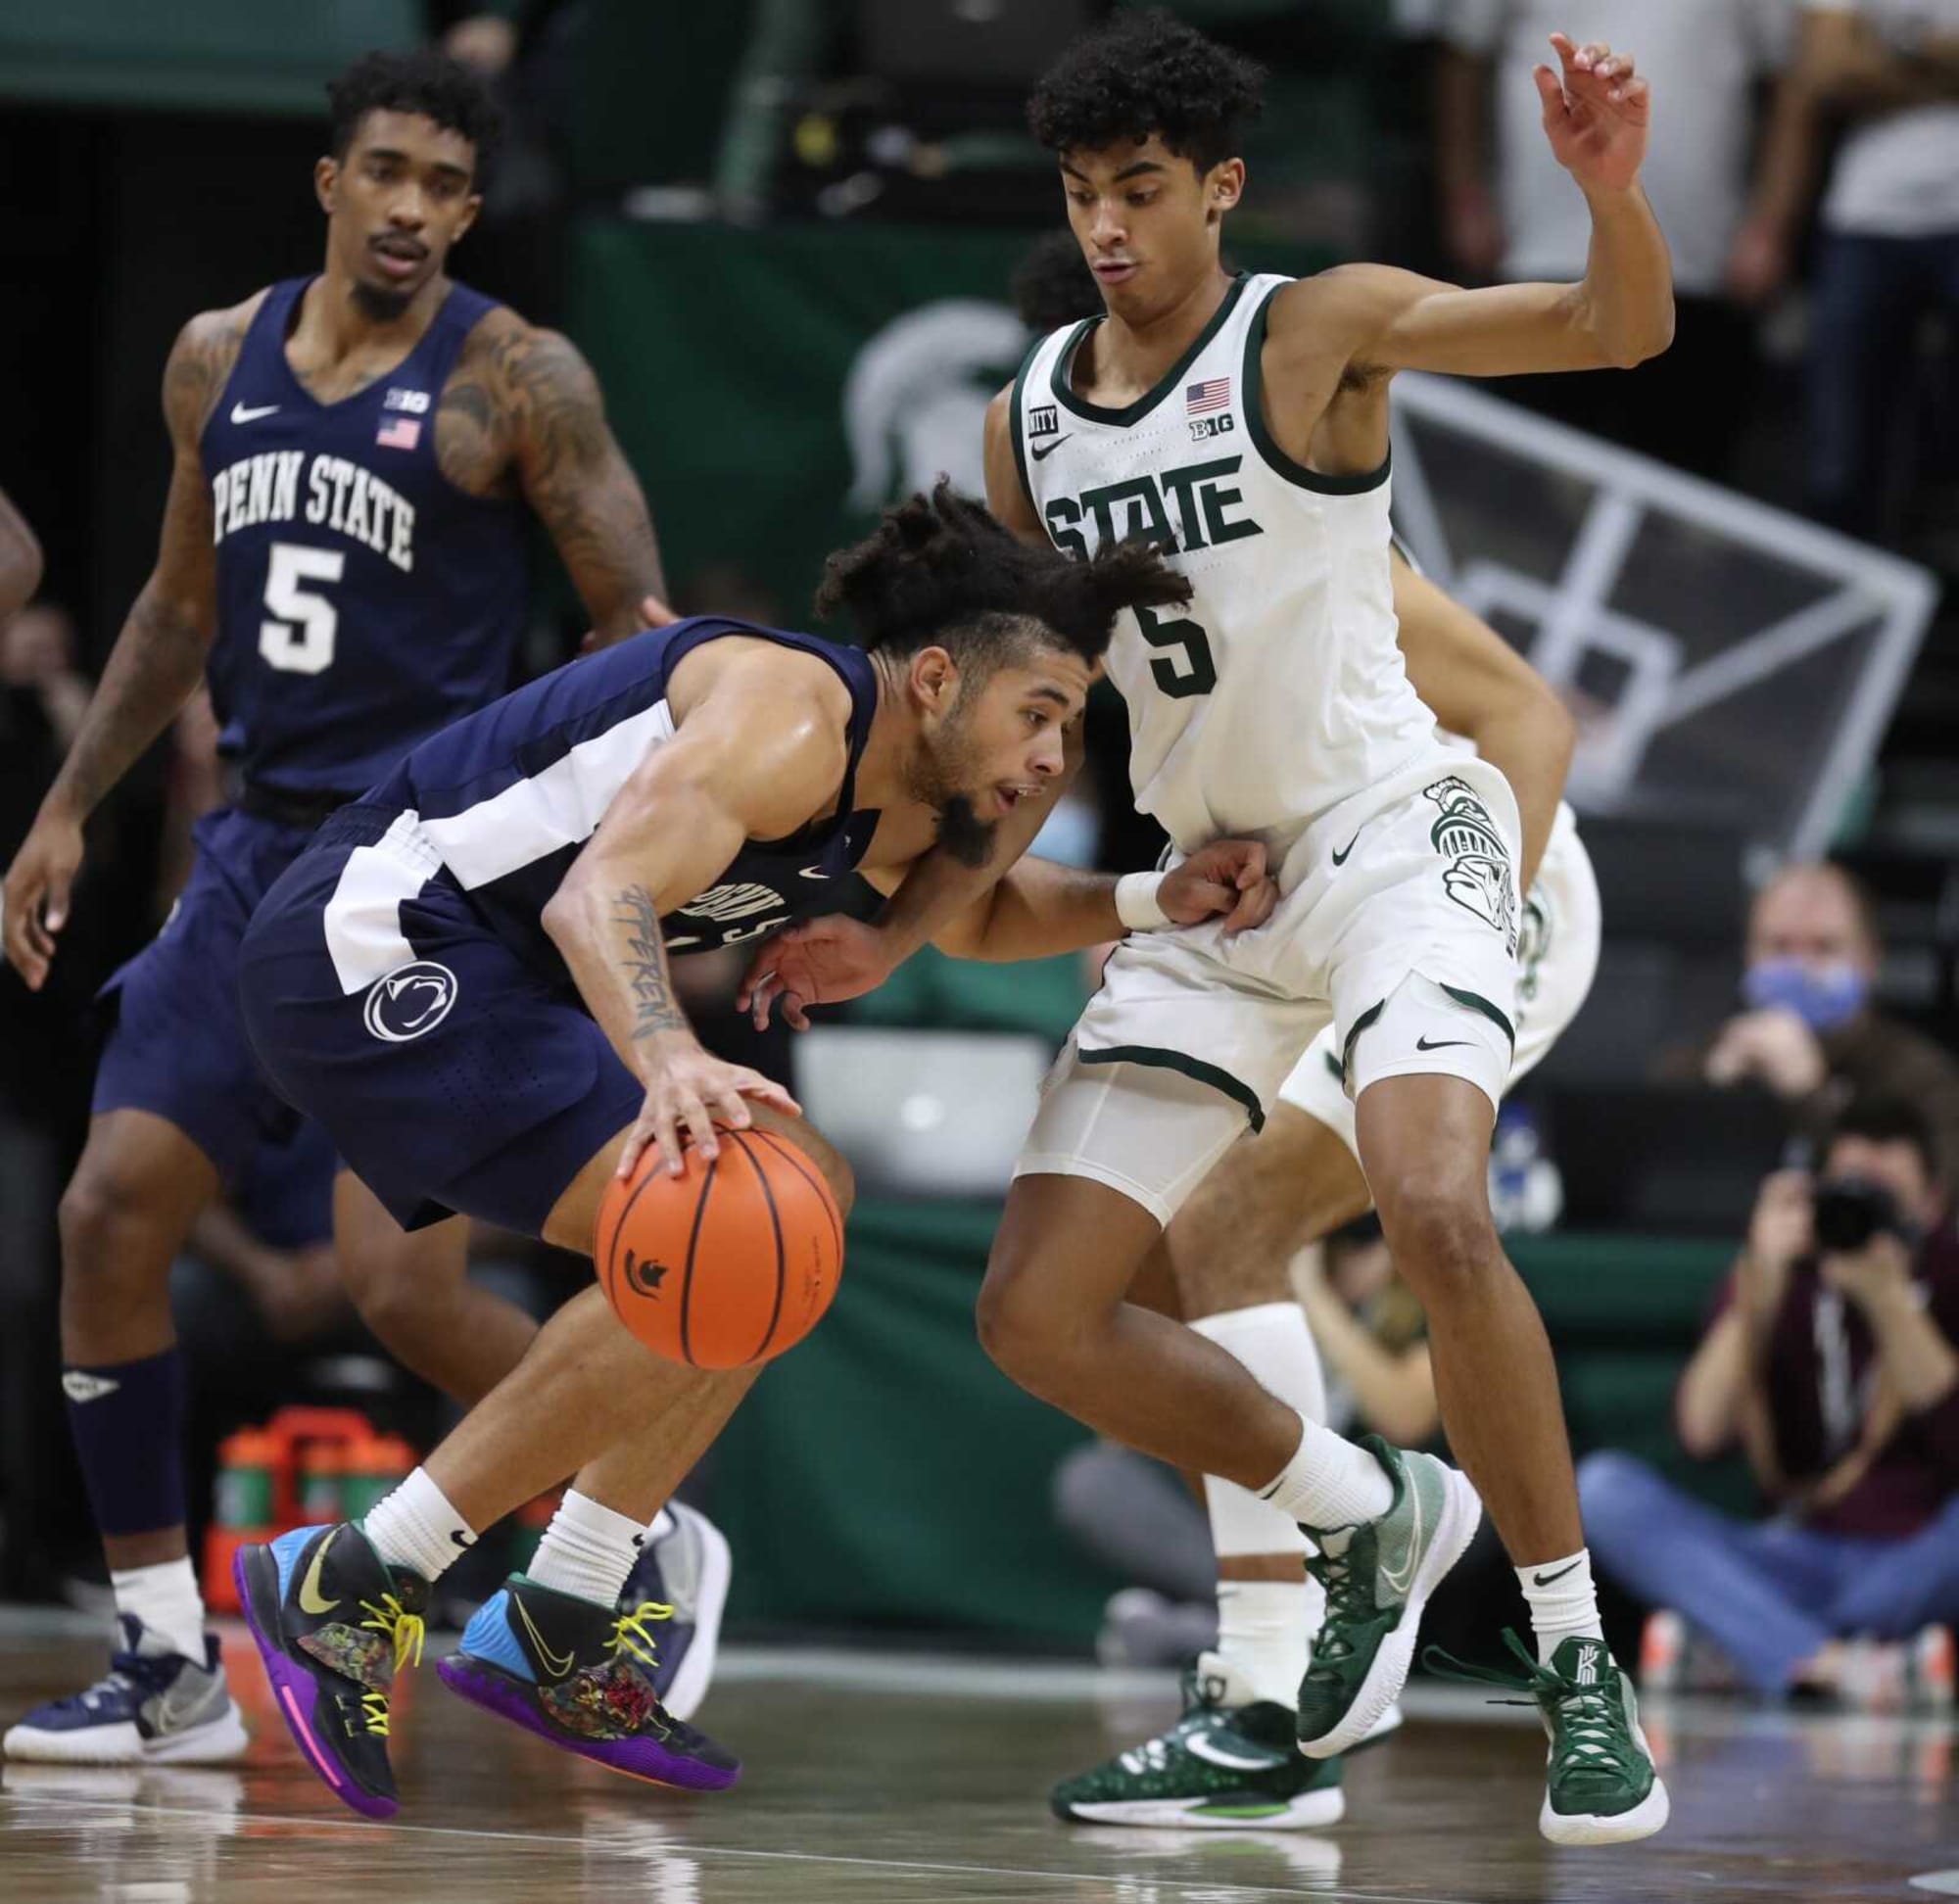 Penn State Basketball game today Penn State vs Indiana odds, Injury Report, Prediction, Schedule, Live Stream and TV Channel